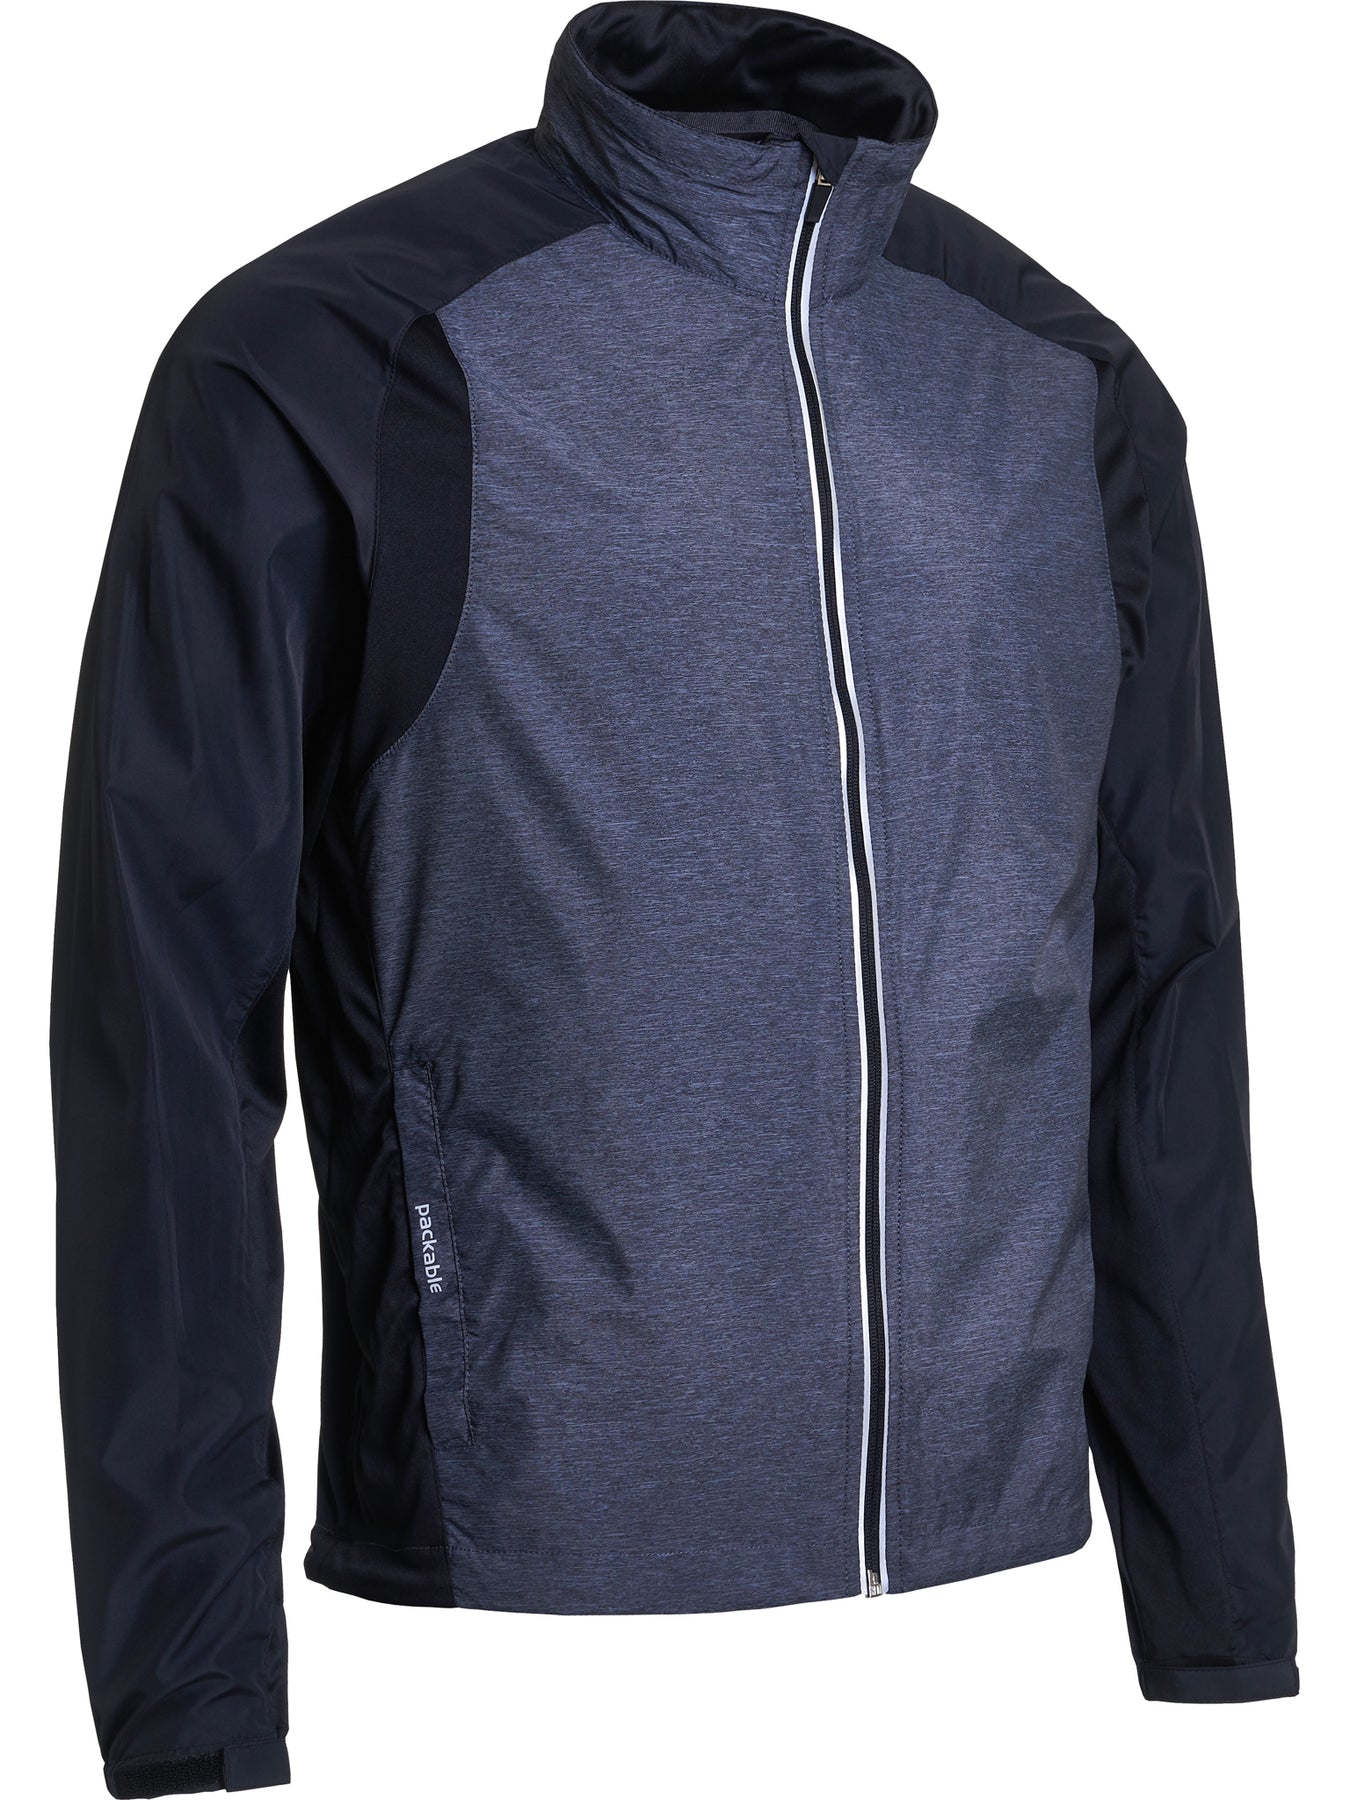 Abacus Sports Wear: Men’s High-Performance Wind Jacket – Formby